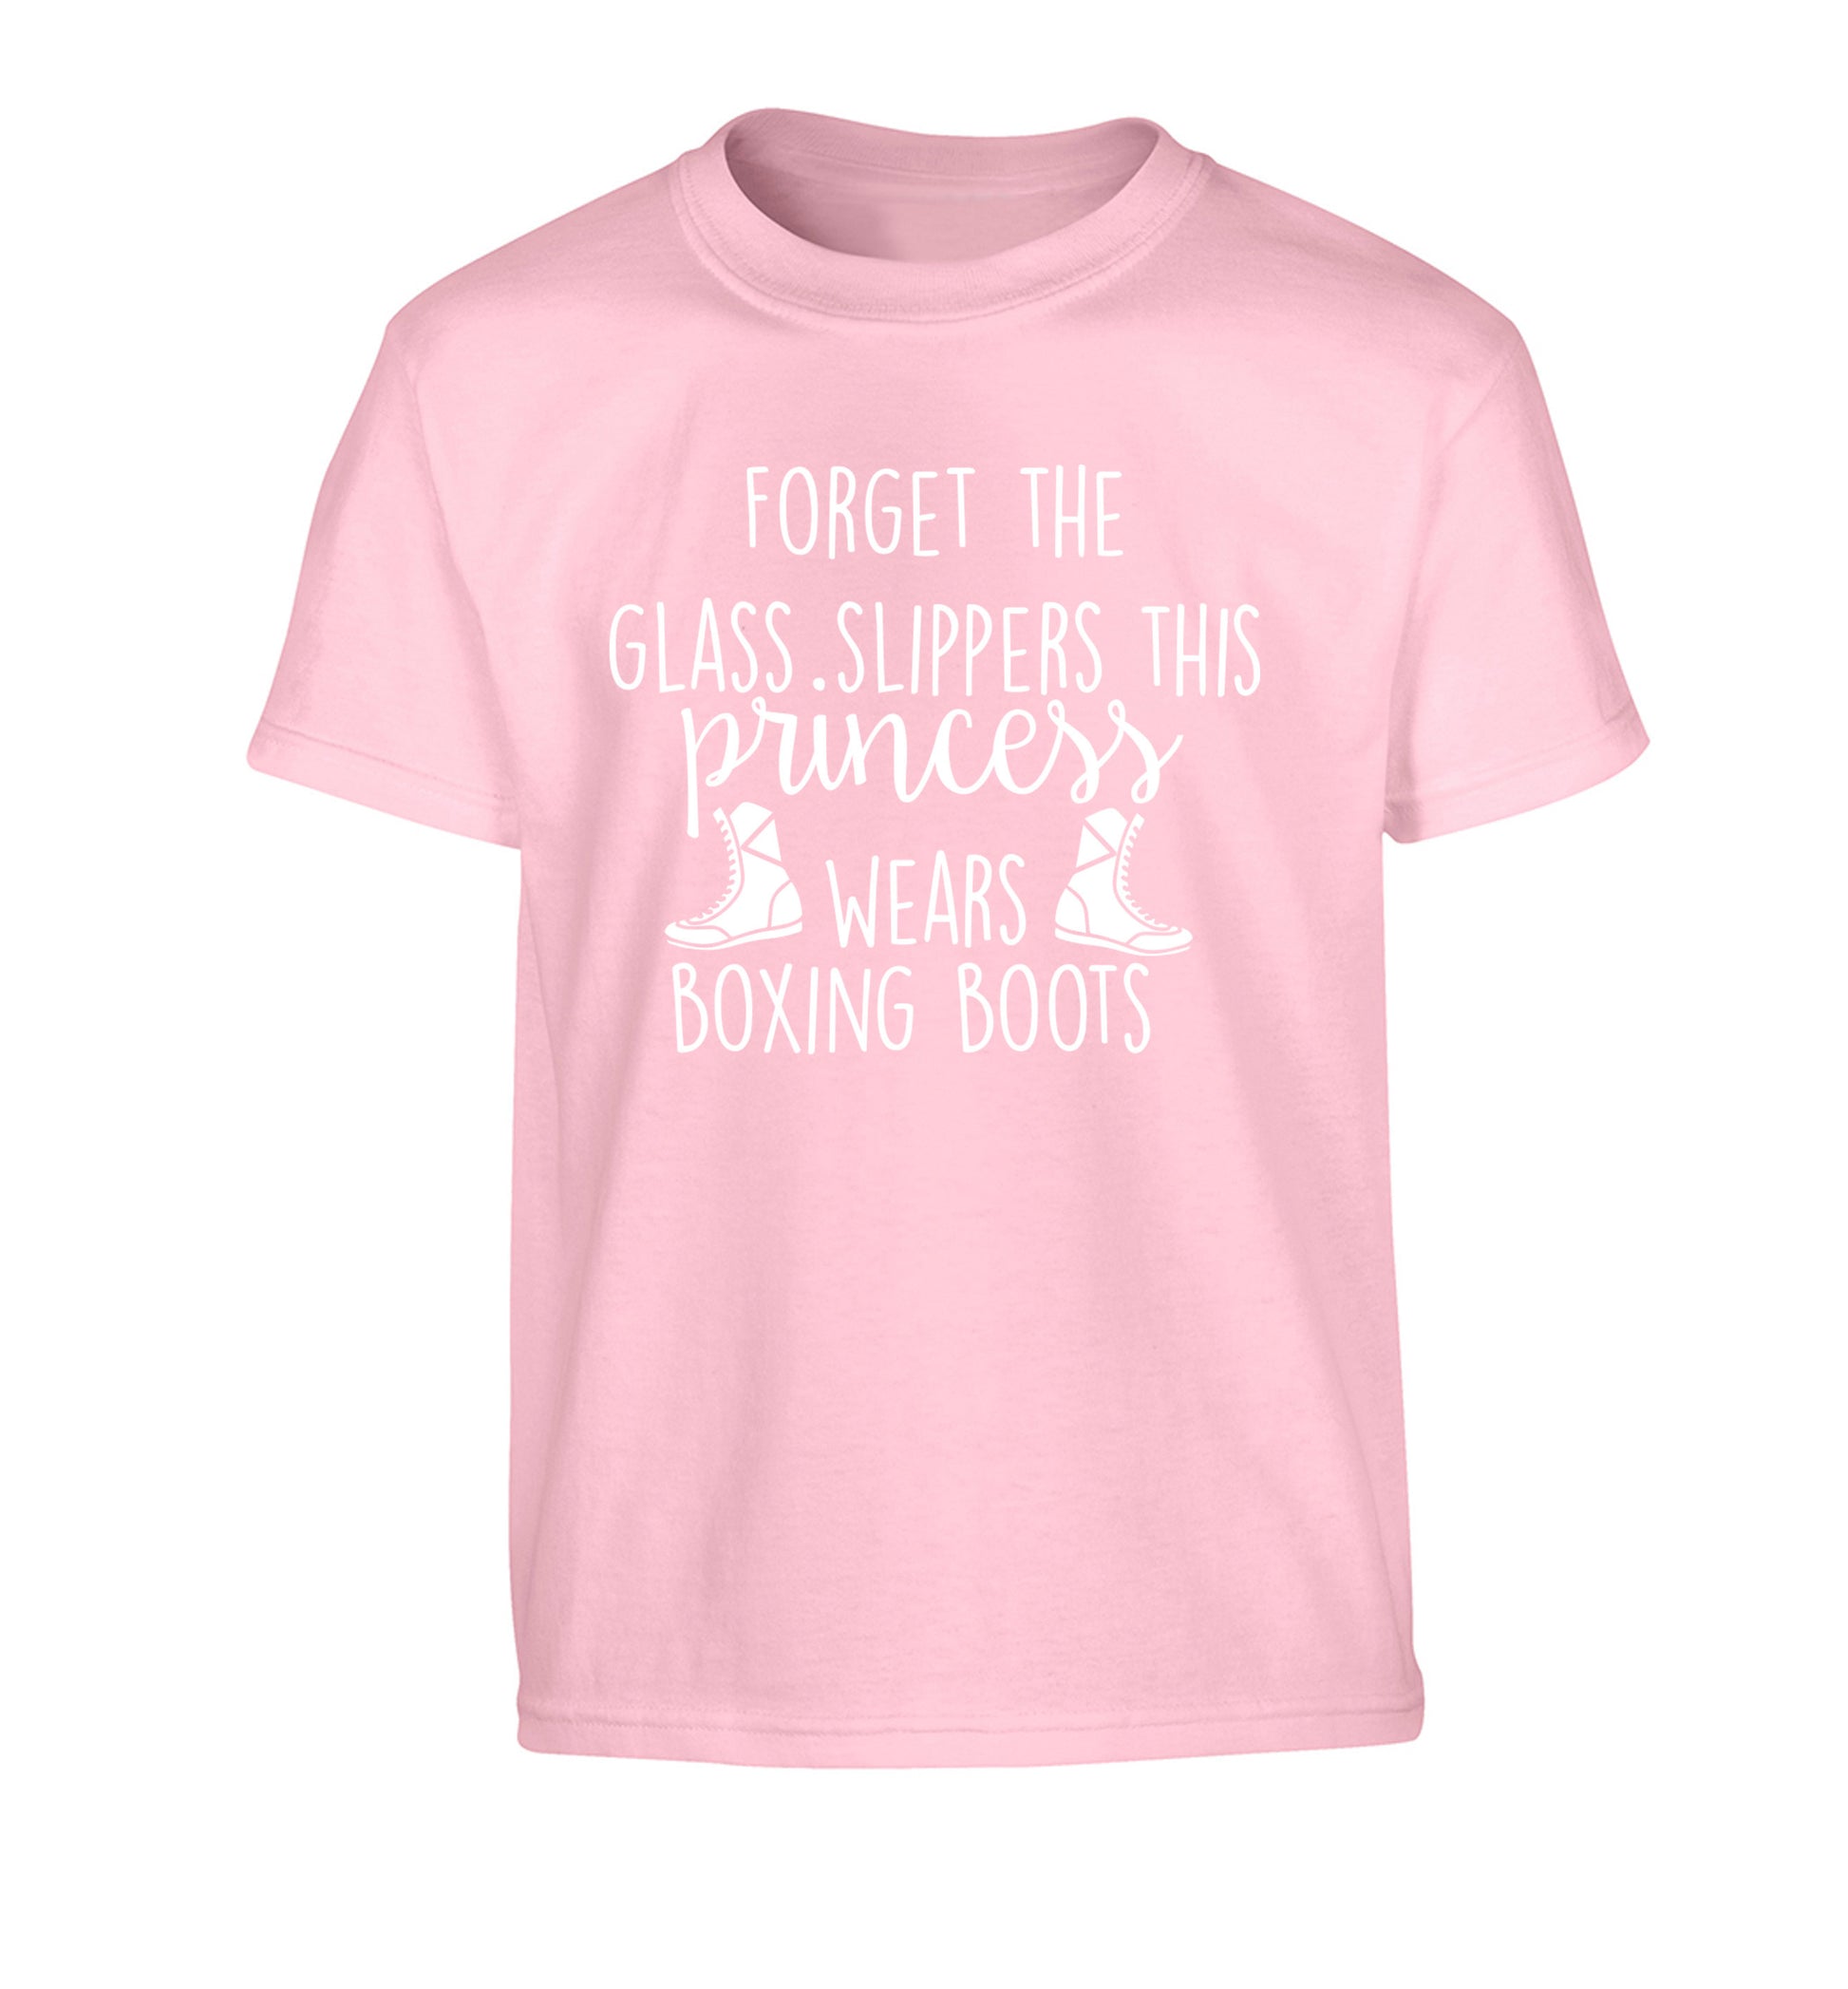 Forget the glass slippers this princess wears boxing boots Children's light pink Tshirt 12-14 Years